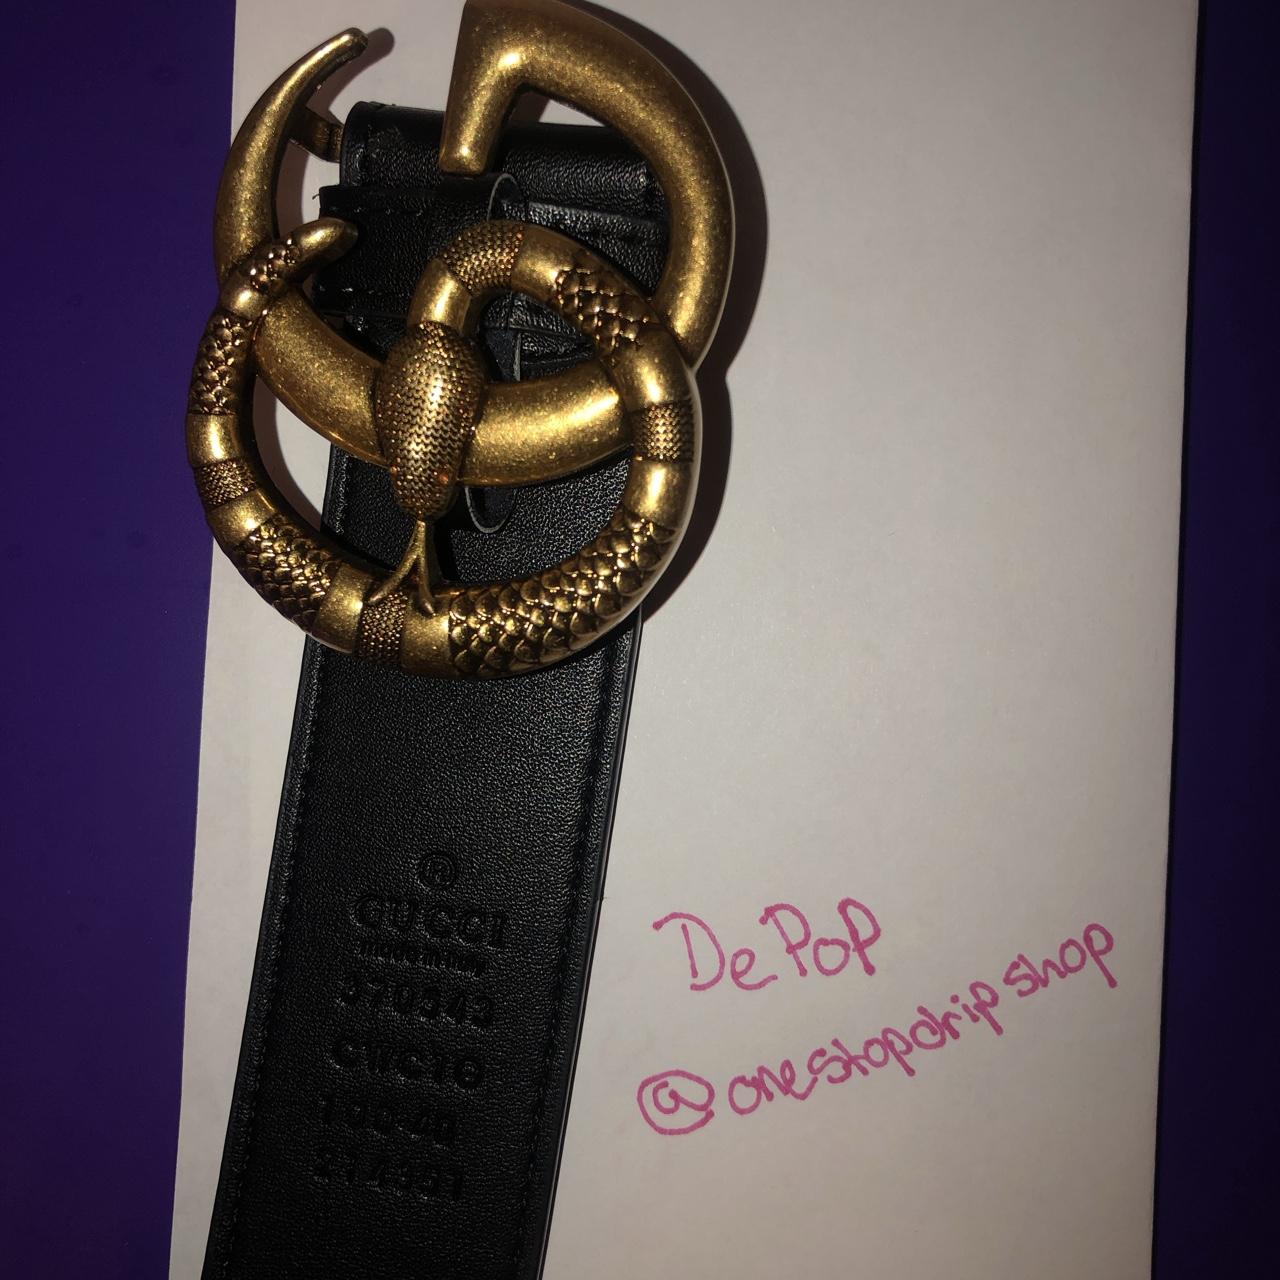 GUCCI GG Snake Gold Buckle Belt Gold/Brass With Leather